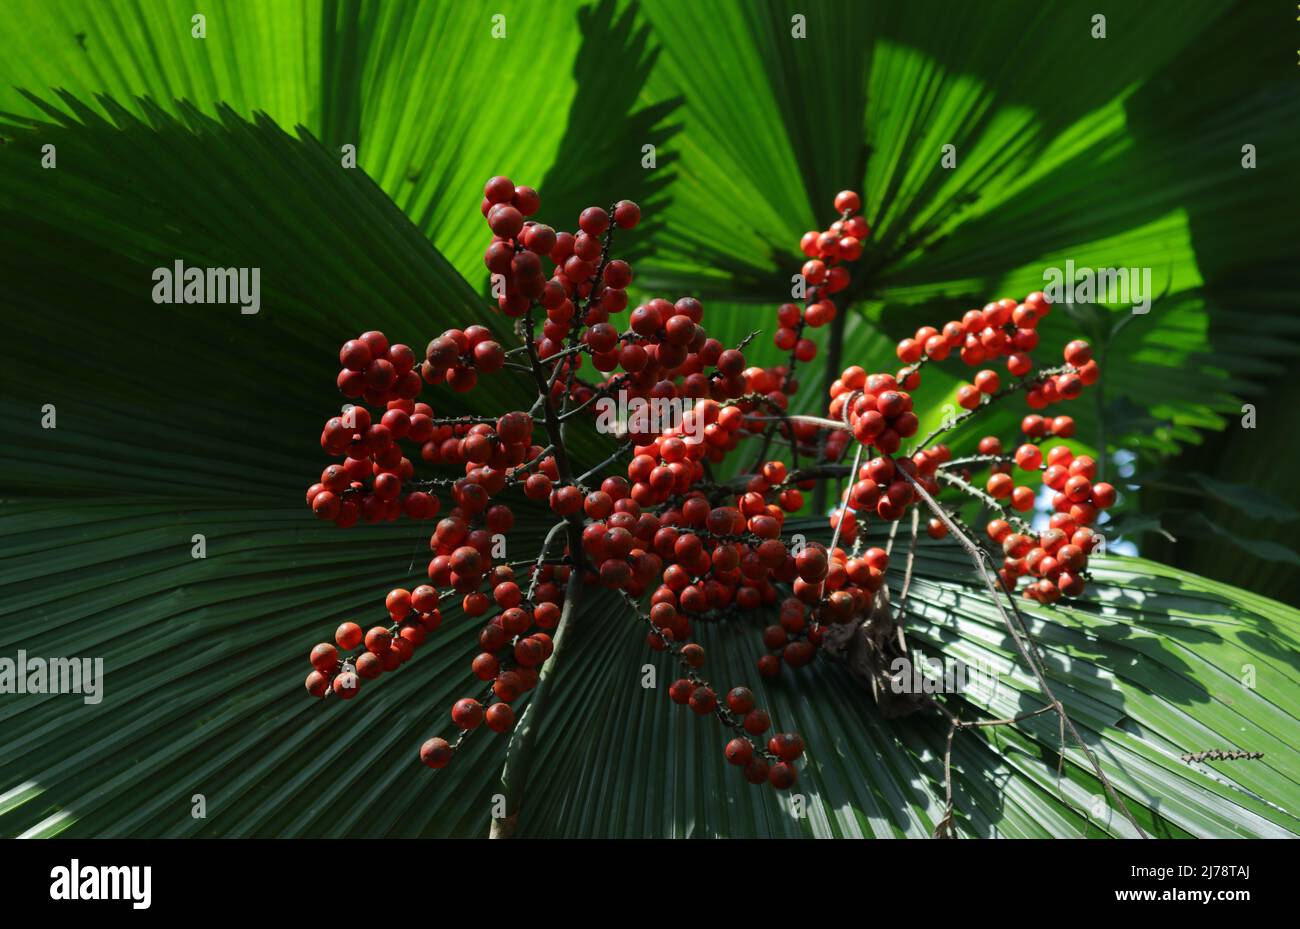 A ripe seed cluster of ruffled fan palm plant (Licuala grandis) with leaves Stock Photo